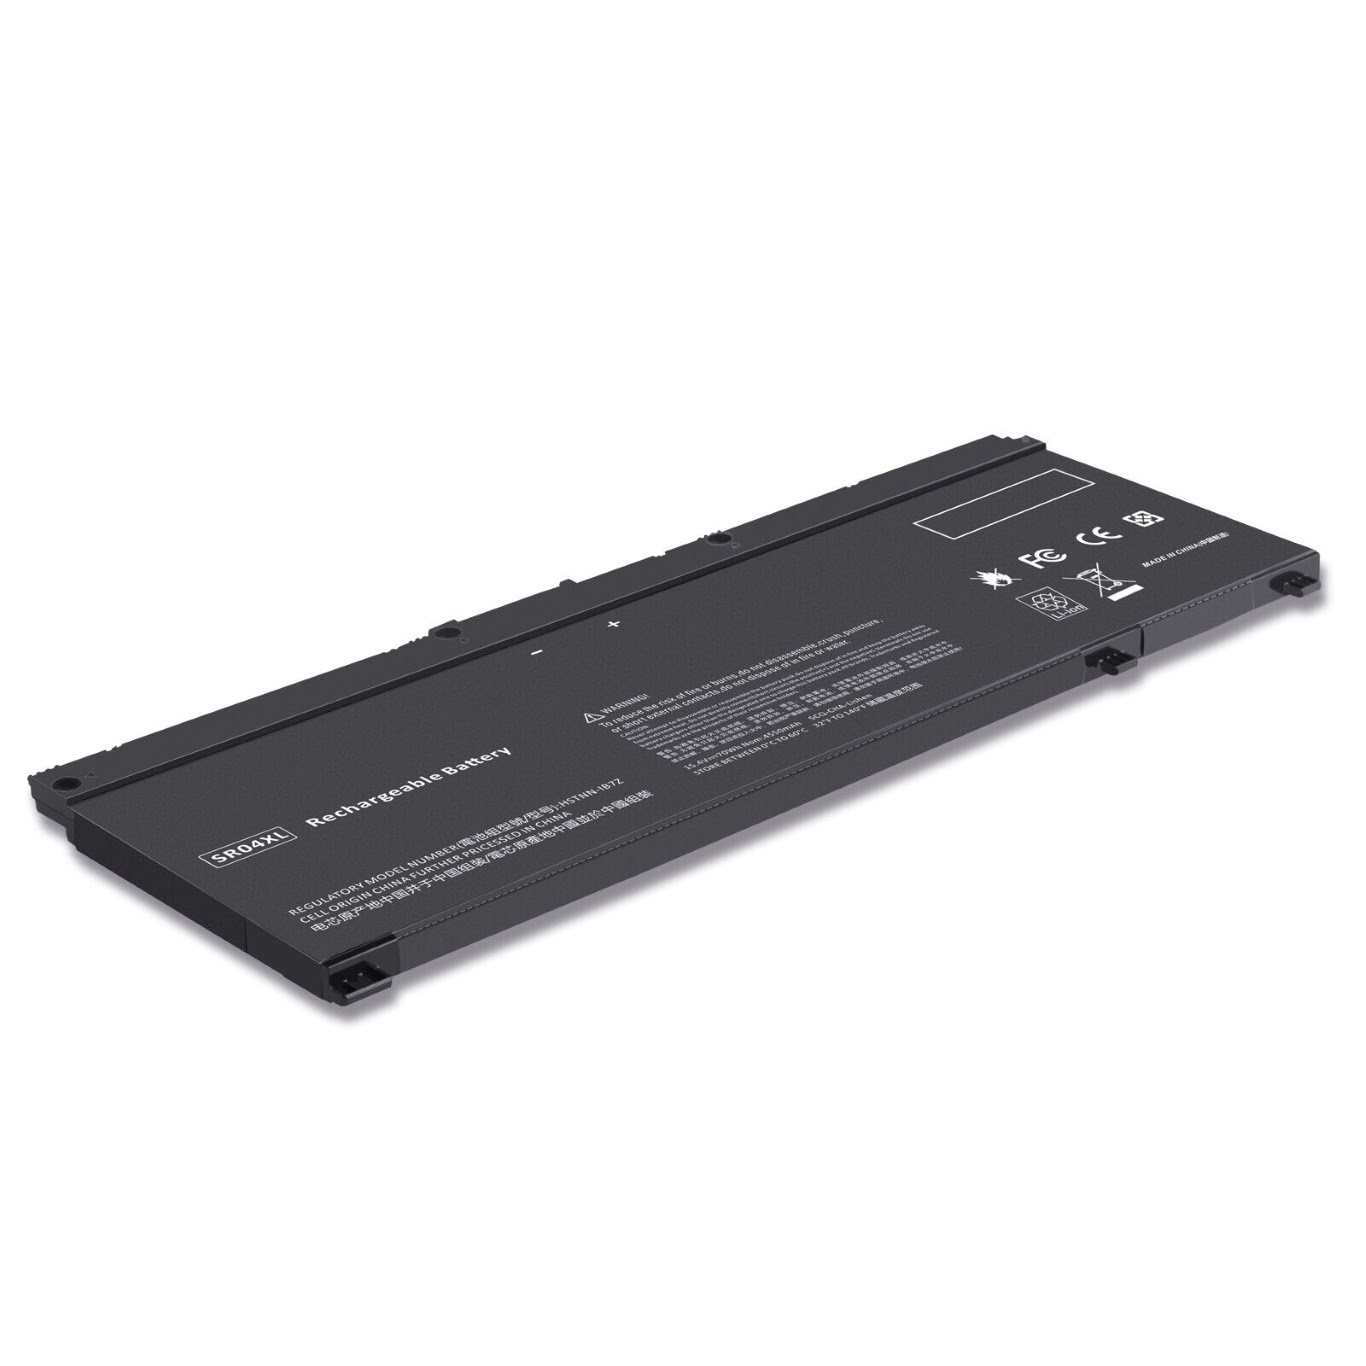 917678-1B1, 917678-2B1 replacement Laptop Battery for HP Omen 15-ce000ng, Omen 15-CE001NA, 15.4v, 70wh, 4 cells